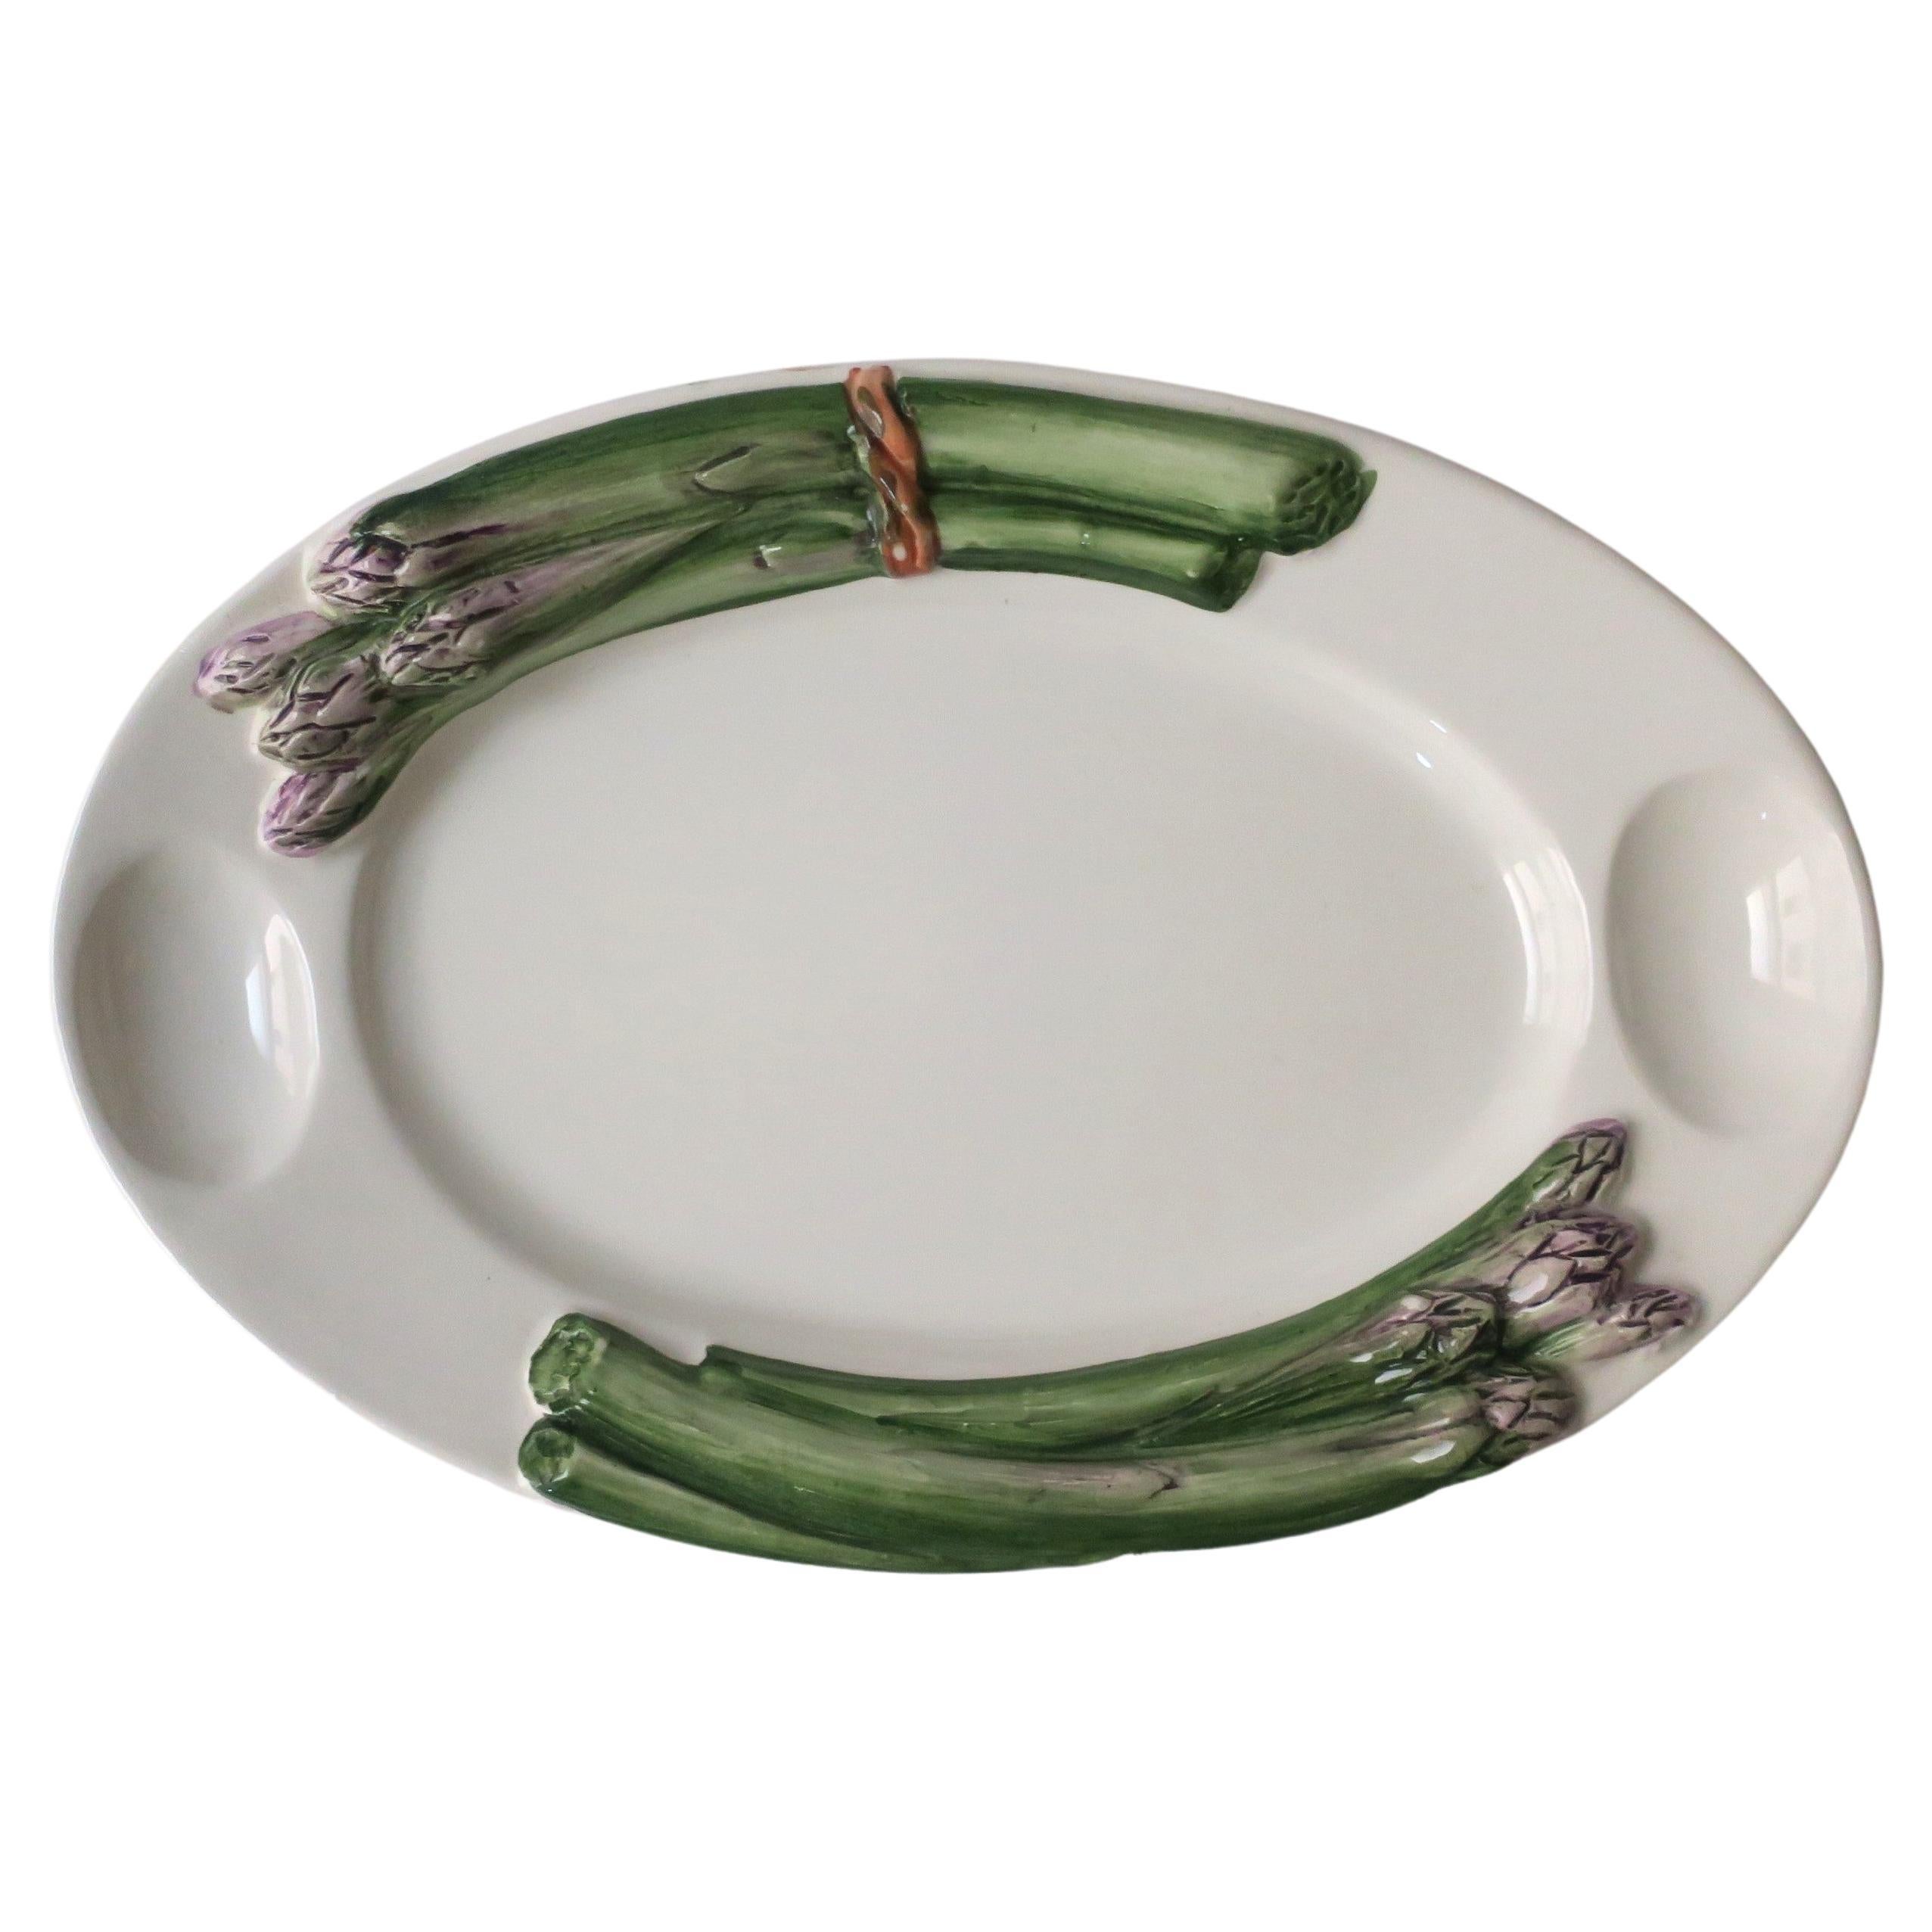 Italian Asparagus Vegetable Serving Dish with Egg Holder Trompe l'Oeil Style